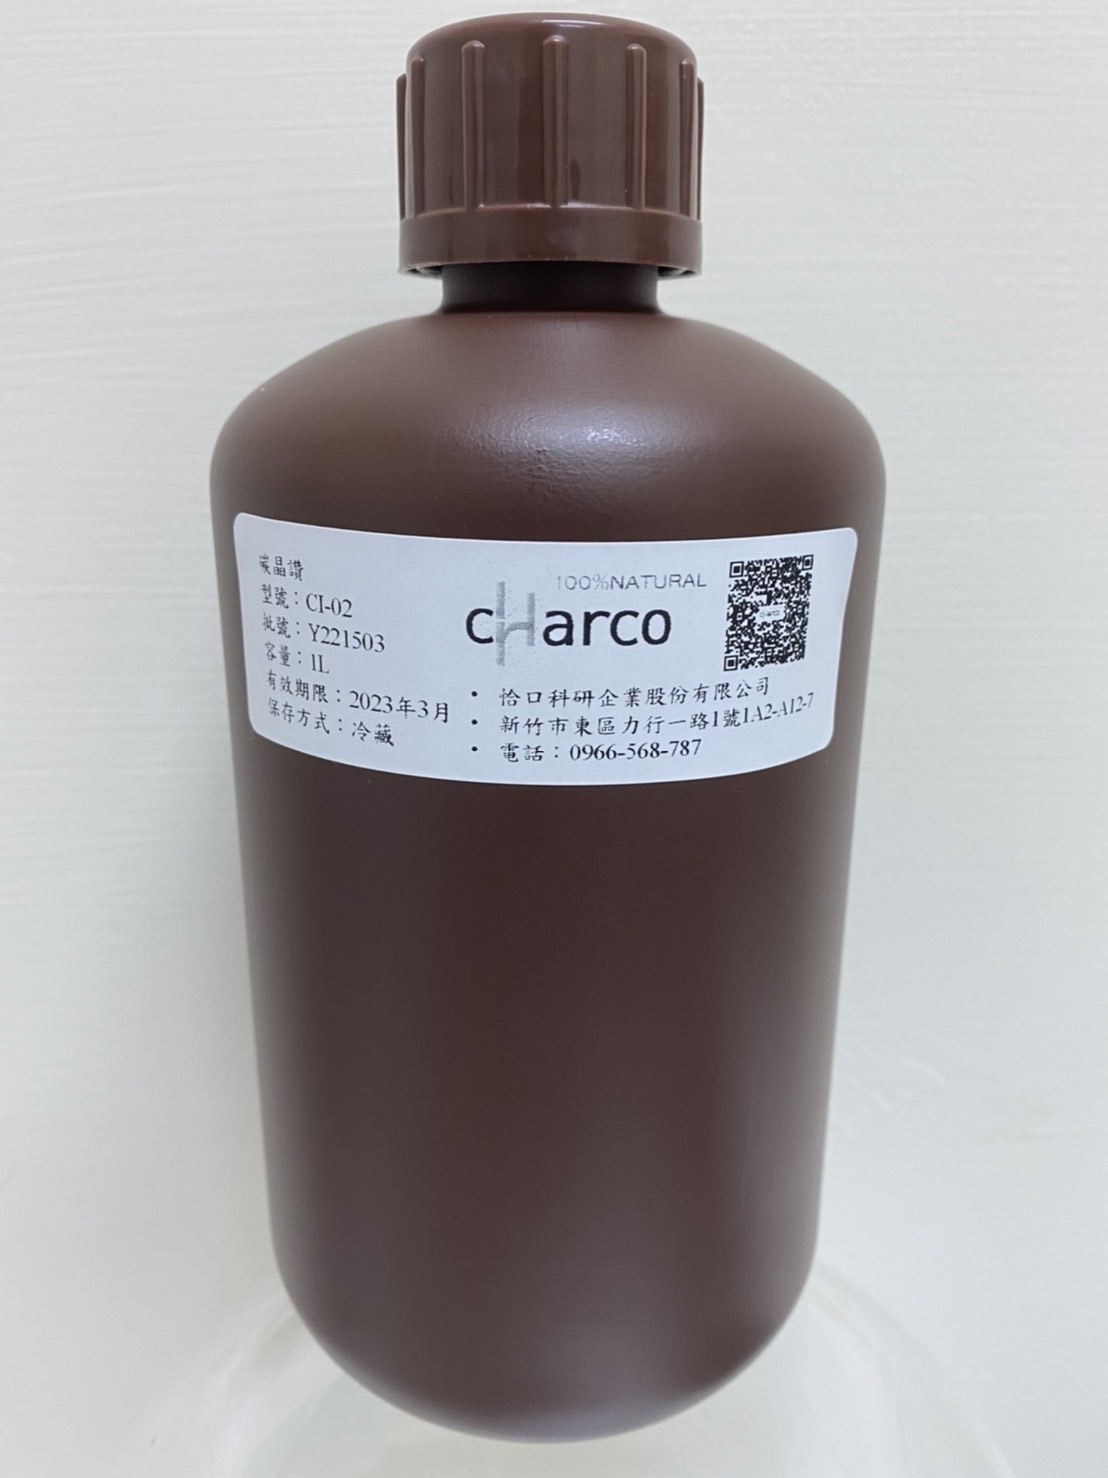 image of Charco plant protection formula, CPPF-CI&WC02